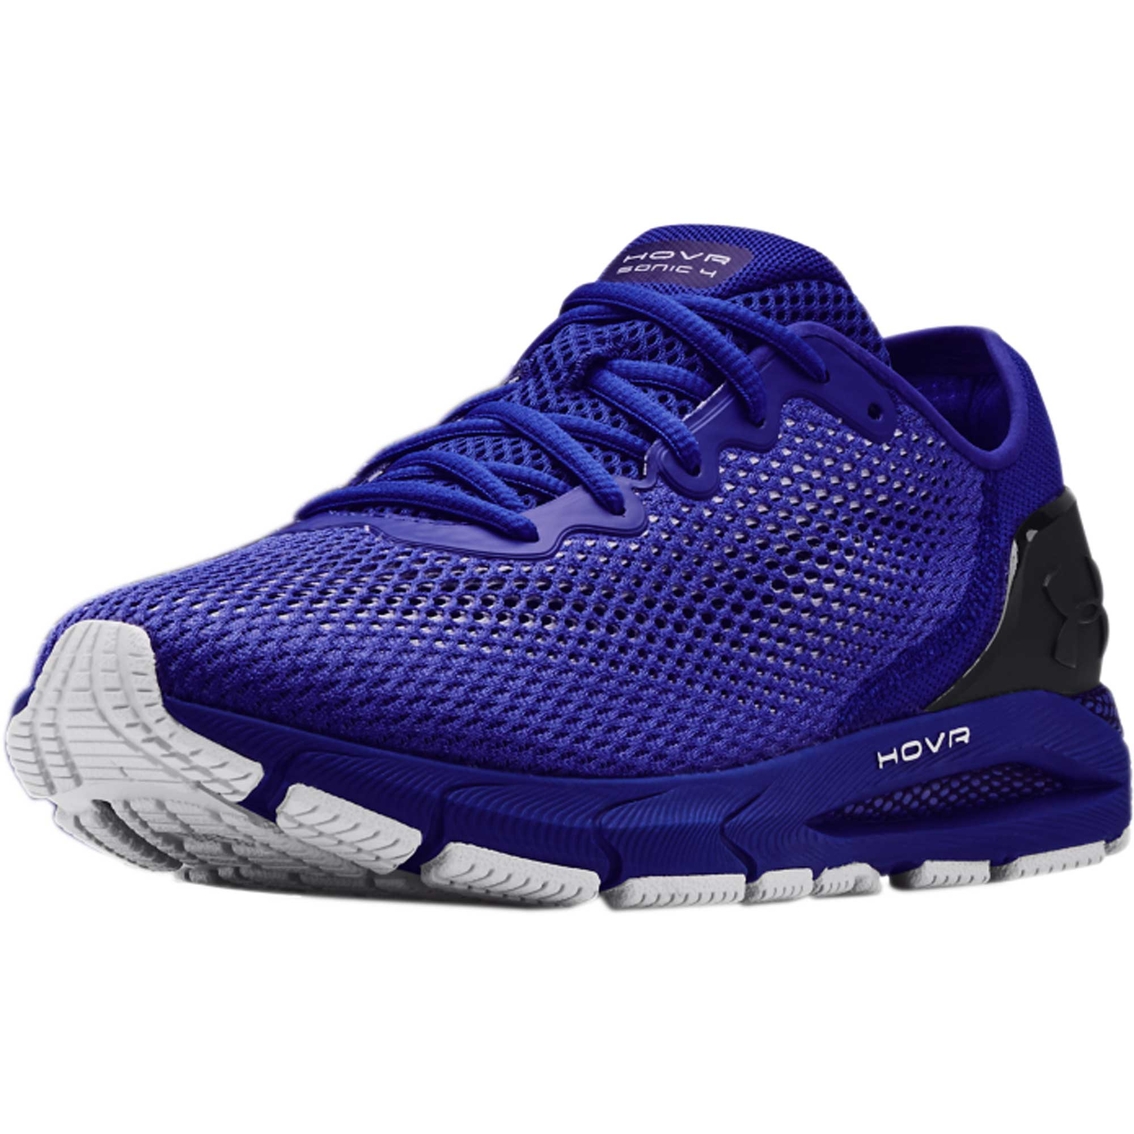 Under Armour Men's Ua Hovr Sonic 4 Running Shoes | Running | Father's